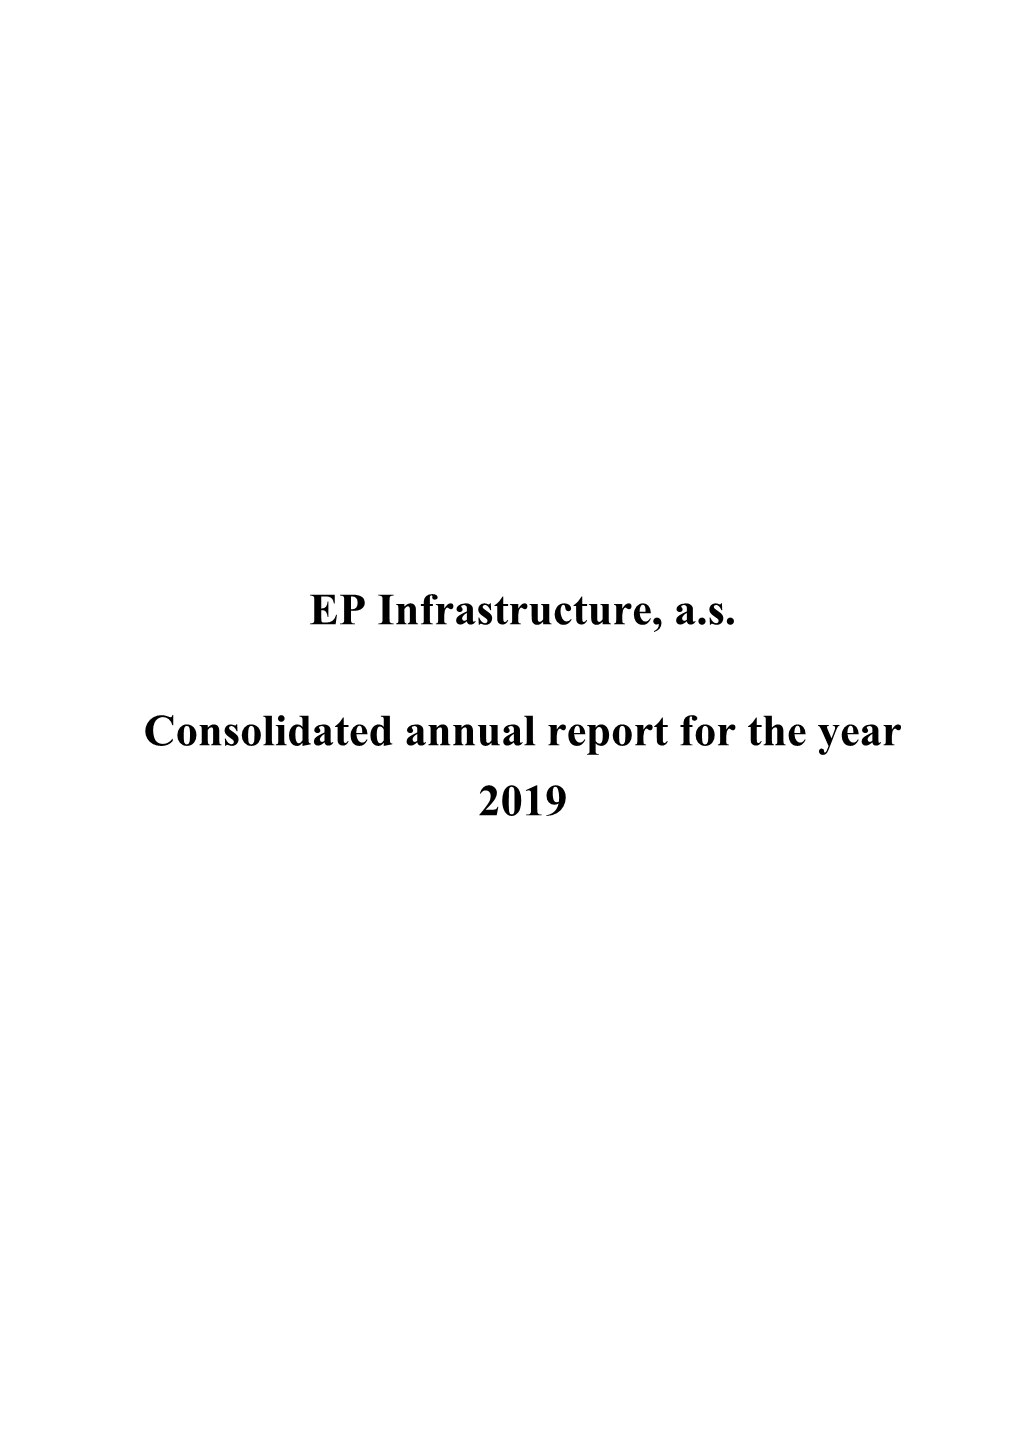 EP Infrastructure, A.S. Consolidated Annual Report for the Year 2019